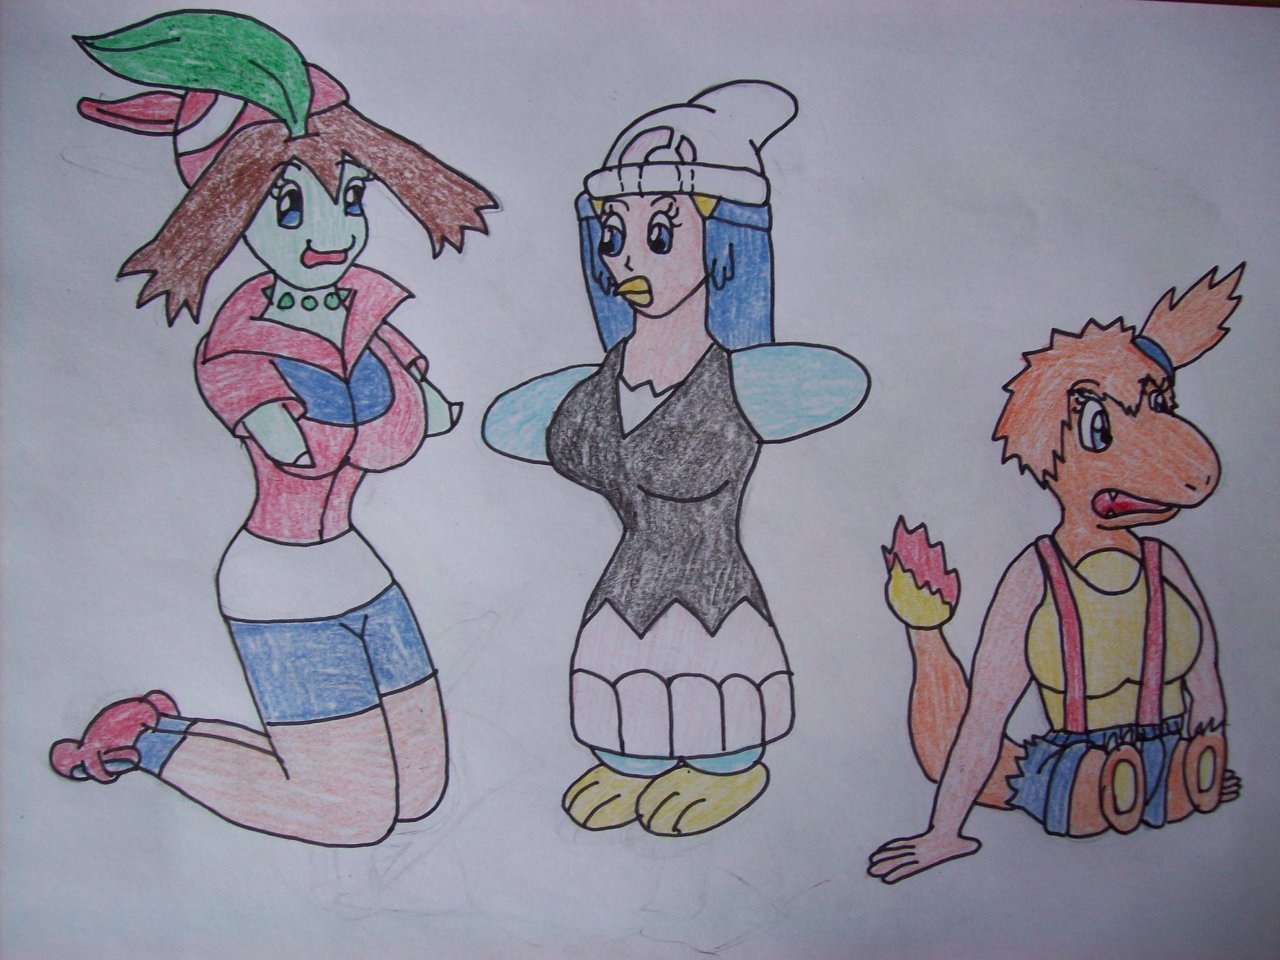 Who are Misty, May, and Dawn in Pokemon and why are they important